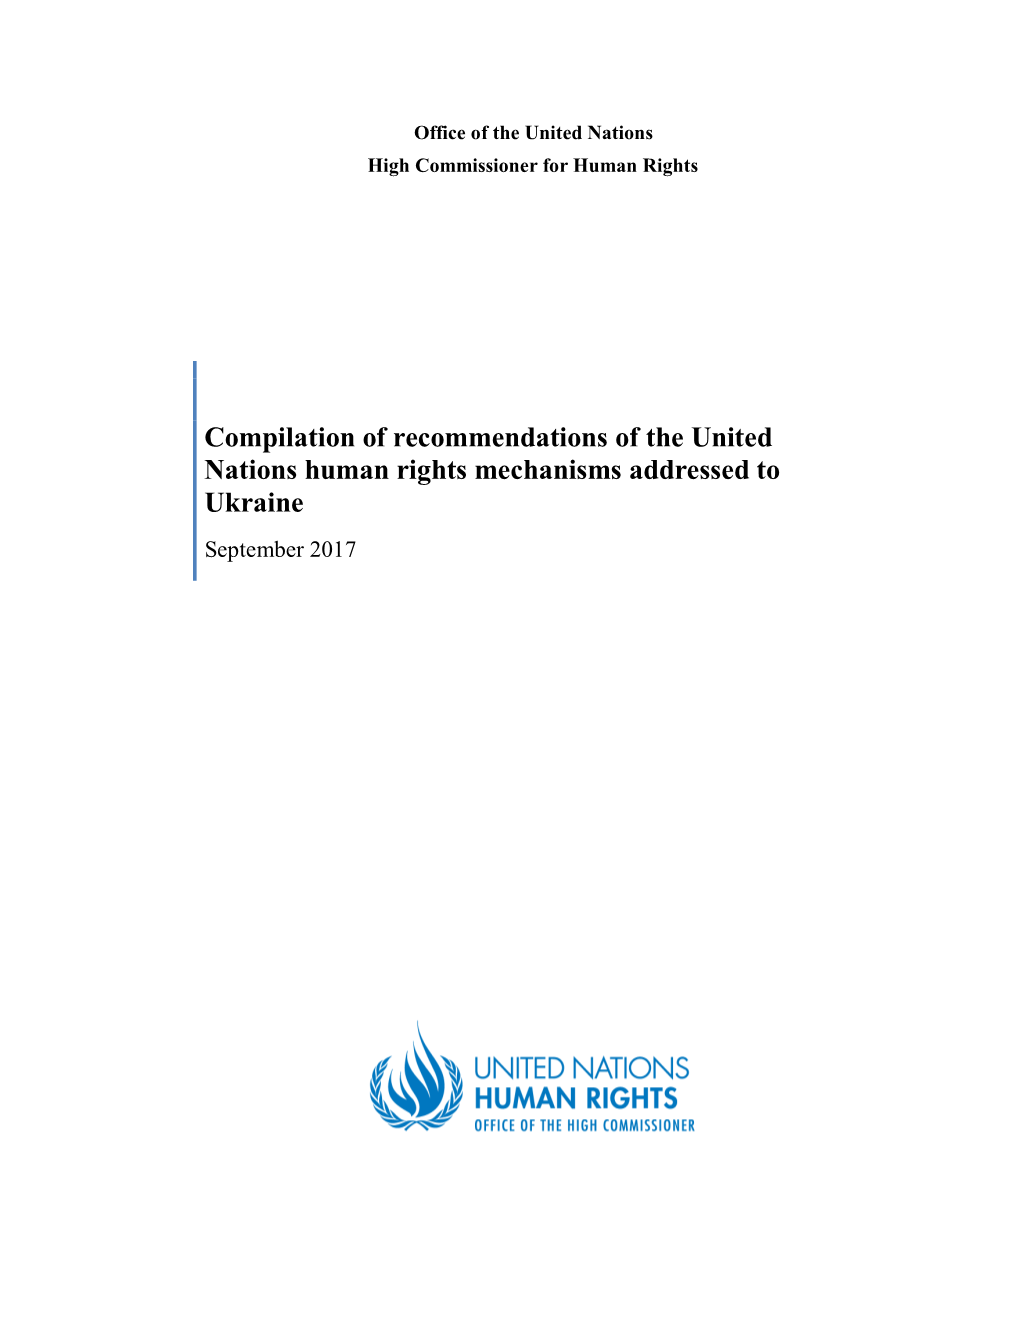 Compilation of Recommendations of the United Nations Human Rights Mechanisms Addressed To